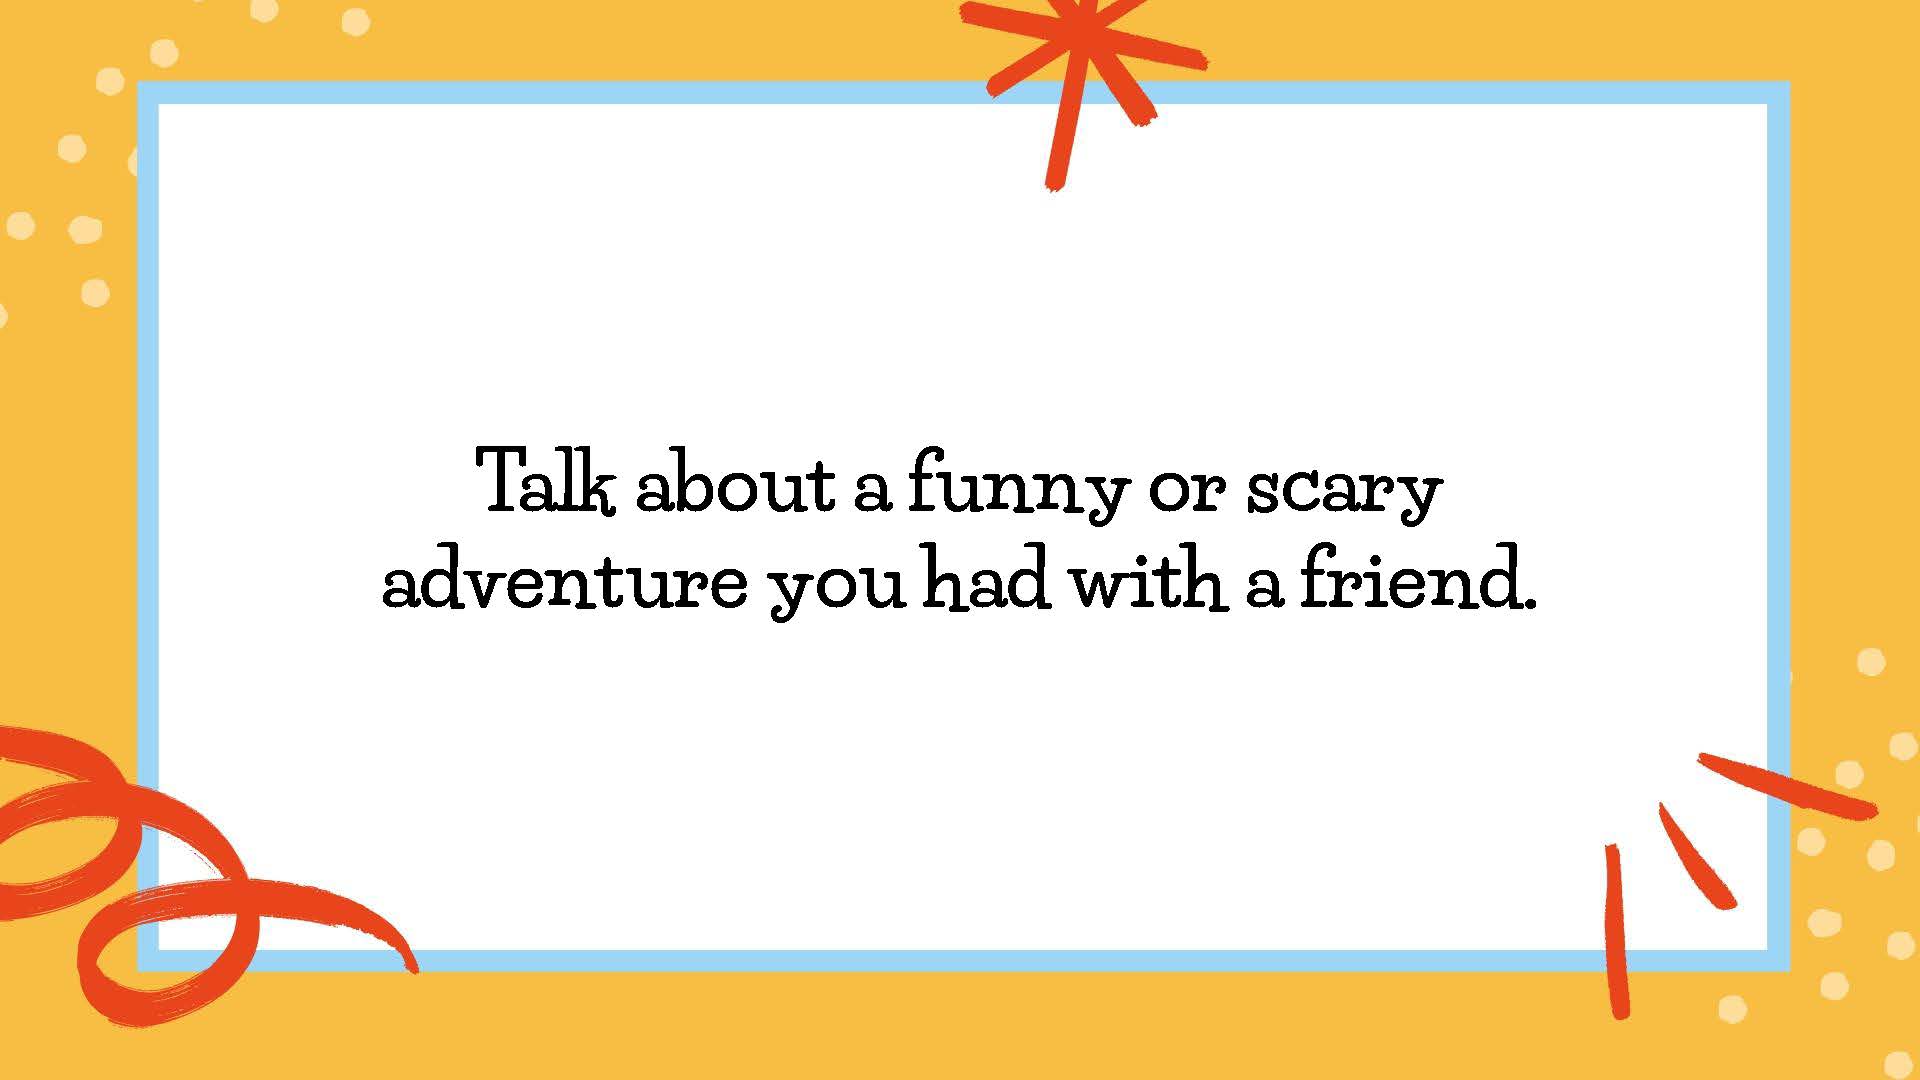 Talk about a funny or scary adventure you had with a friend.